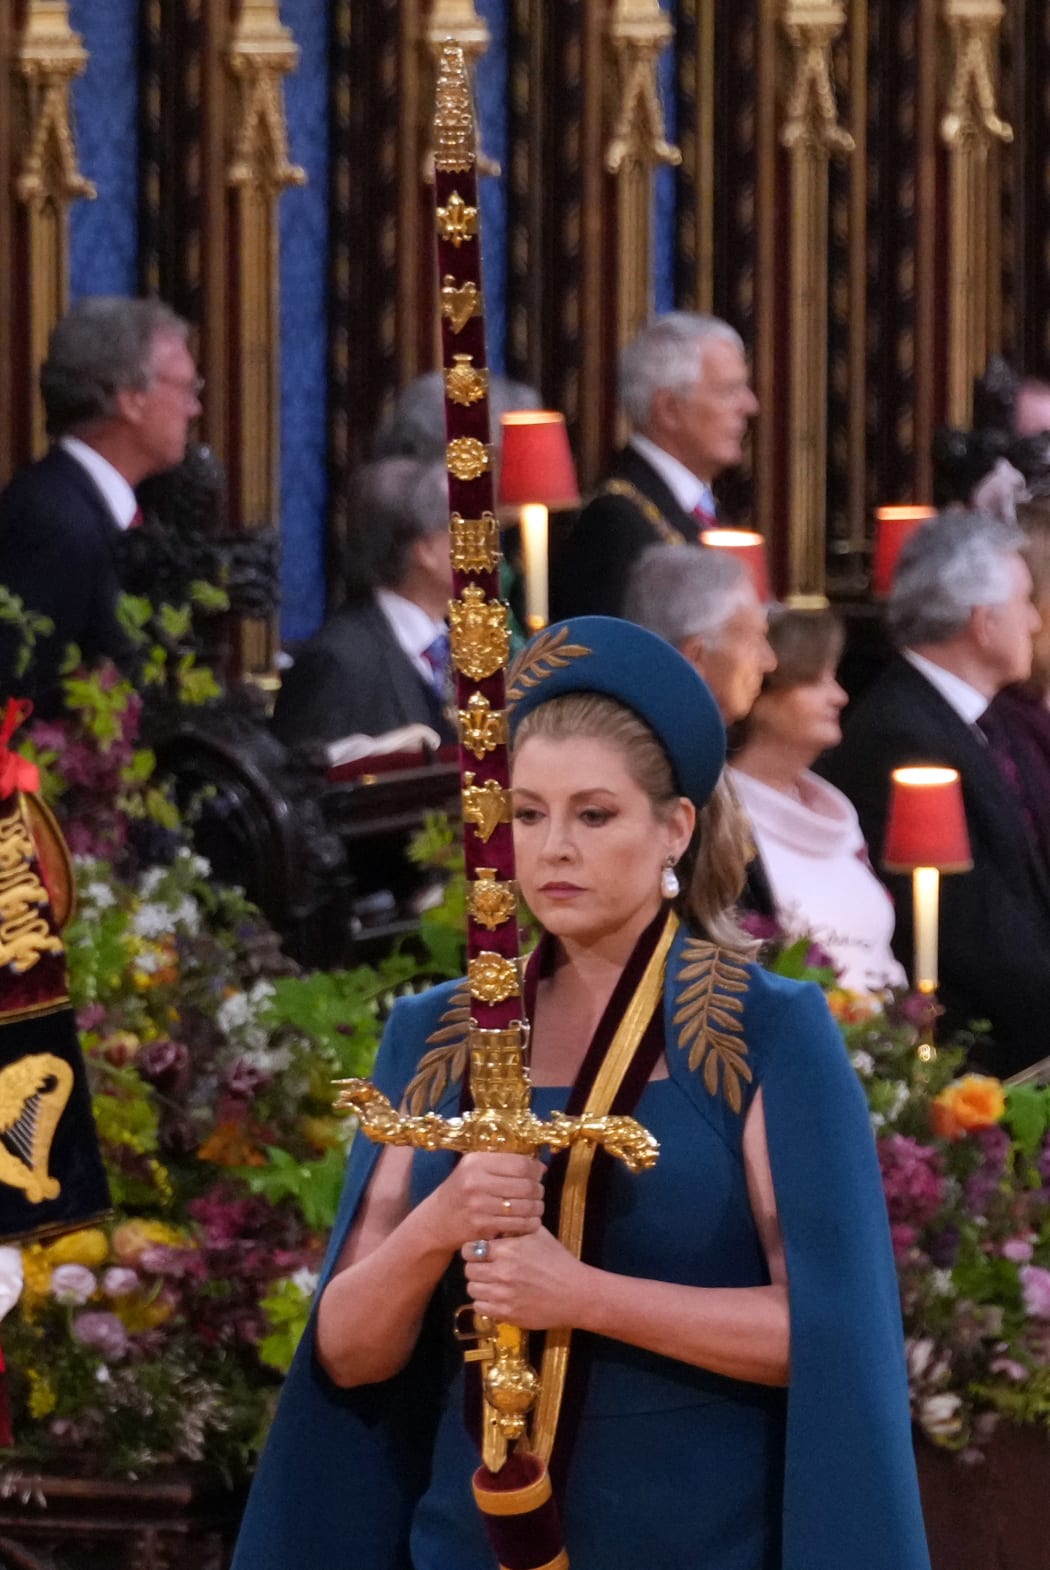 Lord President of the Council, Penny Mordaunt, carries the Sword of State ahead of the coronations of Britain's King Charles III and Britain's Camilla, Queen Consort at Westminster Abbey in central London on May 6, 2023. - The set-piece coronation is the first in Britain in 70 years, and only the second in history to be televised. Charles will be the 40th reigning monarch to be crowned at the central London church since King William I in 1066. Outside the UK, he is also king of 14 other Commonwealth countries, including Australia, Canada and New Zealand. Camilla, his second wife, will be crowned queen alongside him and be known as Queen Camilla after the ceremony. (Photo by Victoria Jones / POOL / AFP)